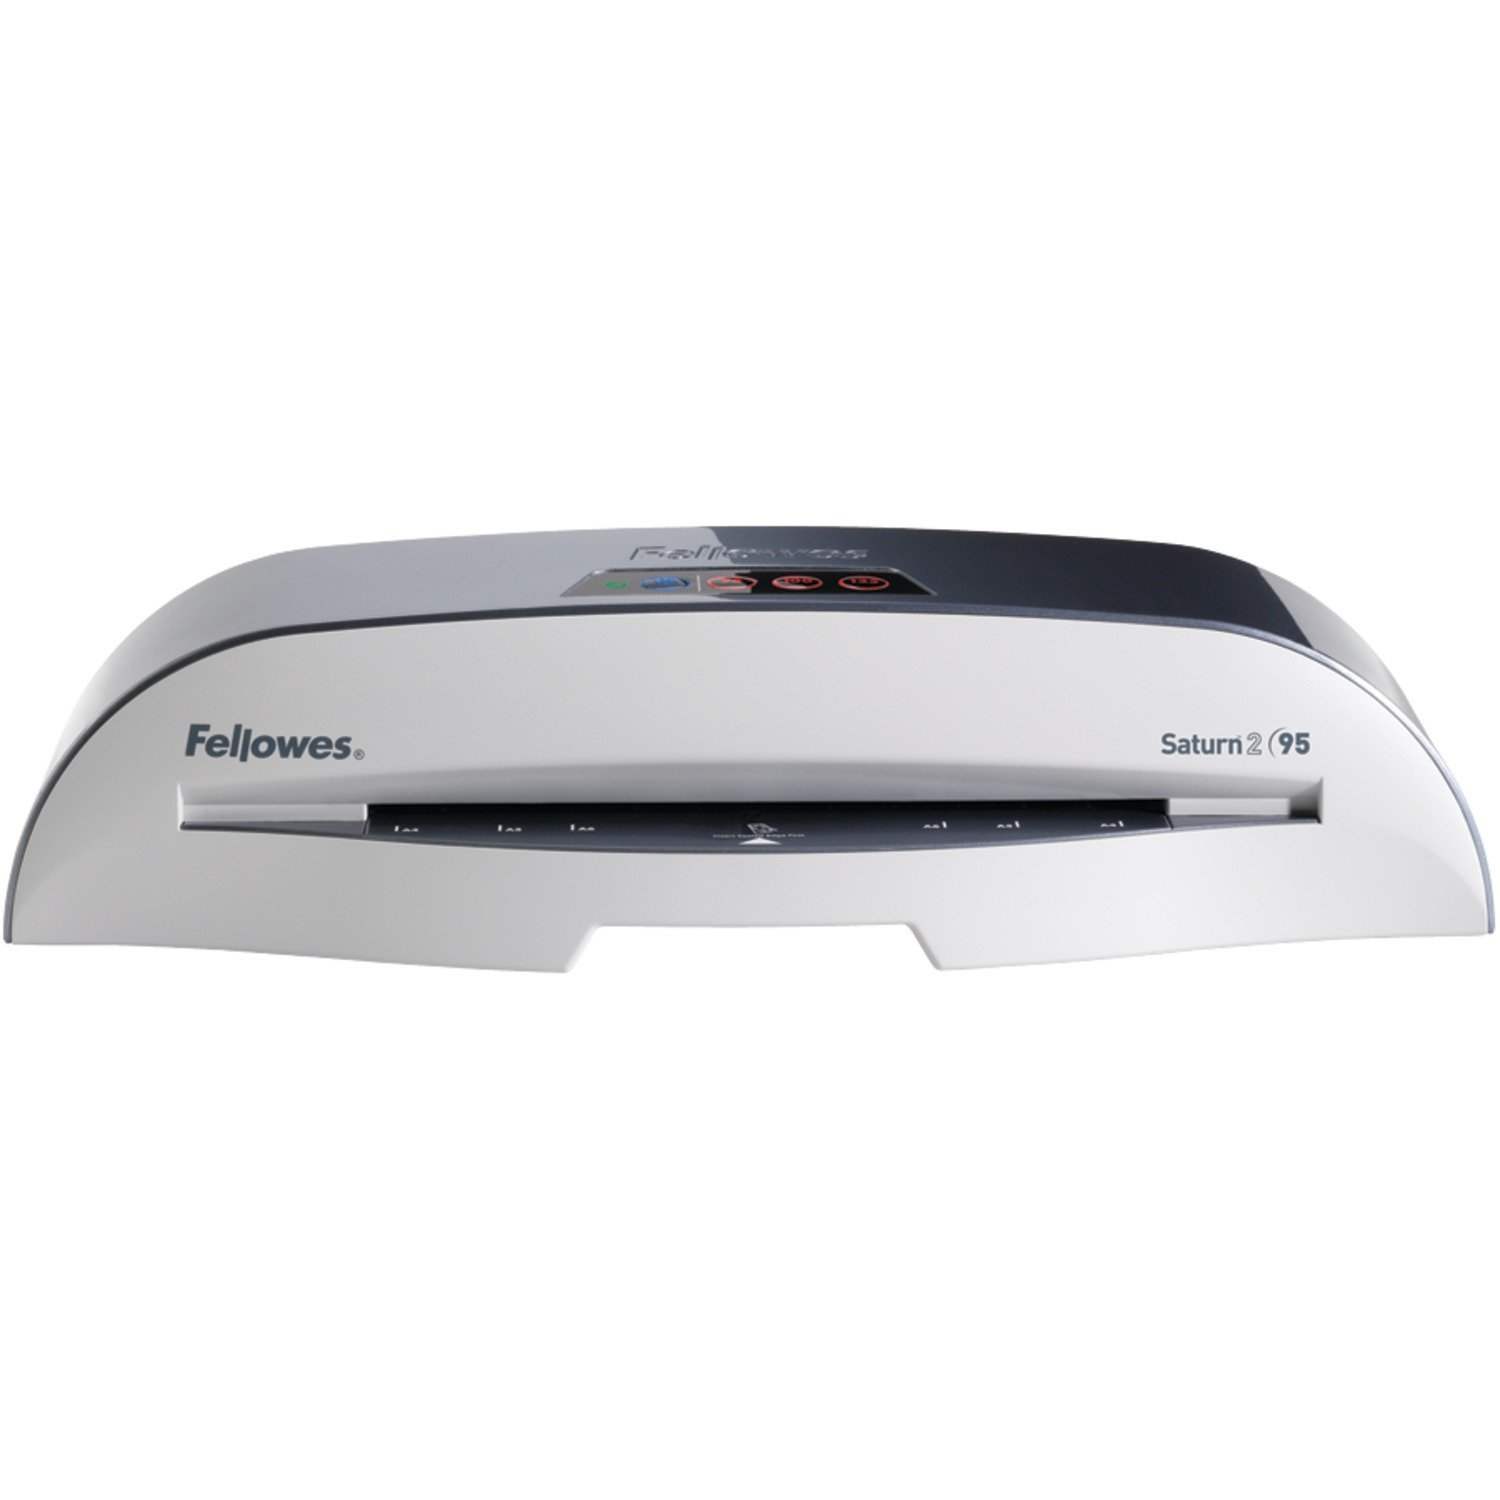 Fellowes Saturn2 95 Laminator, 9.5" with 10 Pouches (5727001)